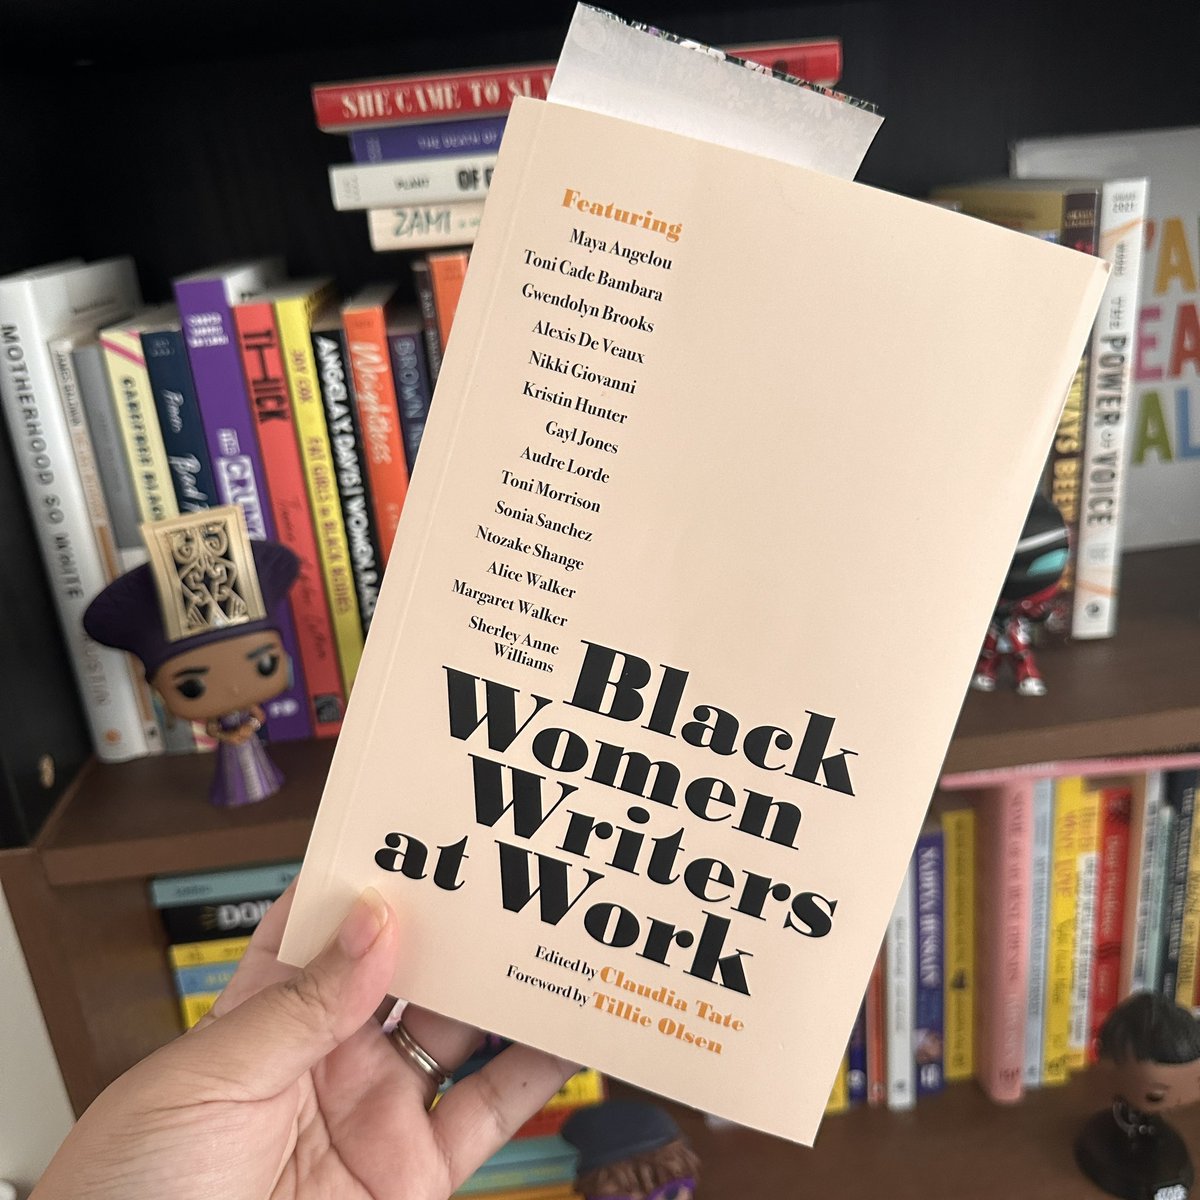 Had an amazing conversation at book club today! This thought-provoking book compiles interviews with 14 authors about life, writing, and the roles being a Black woman plays in both of those. It got me thinking…whose interviews would you want to see in an updated version?